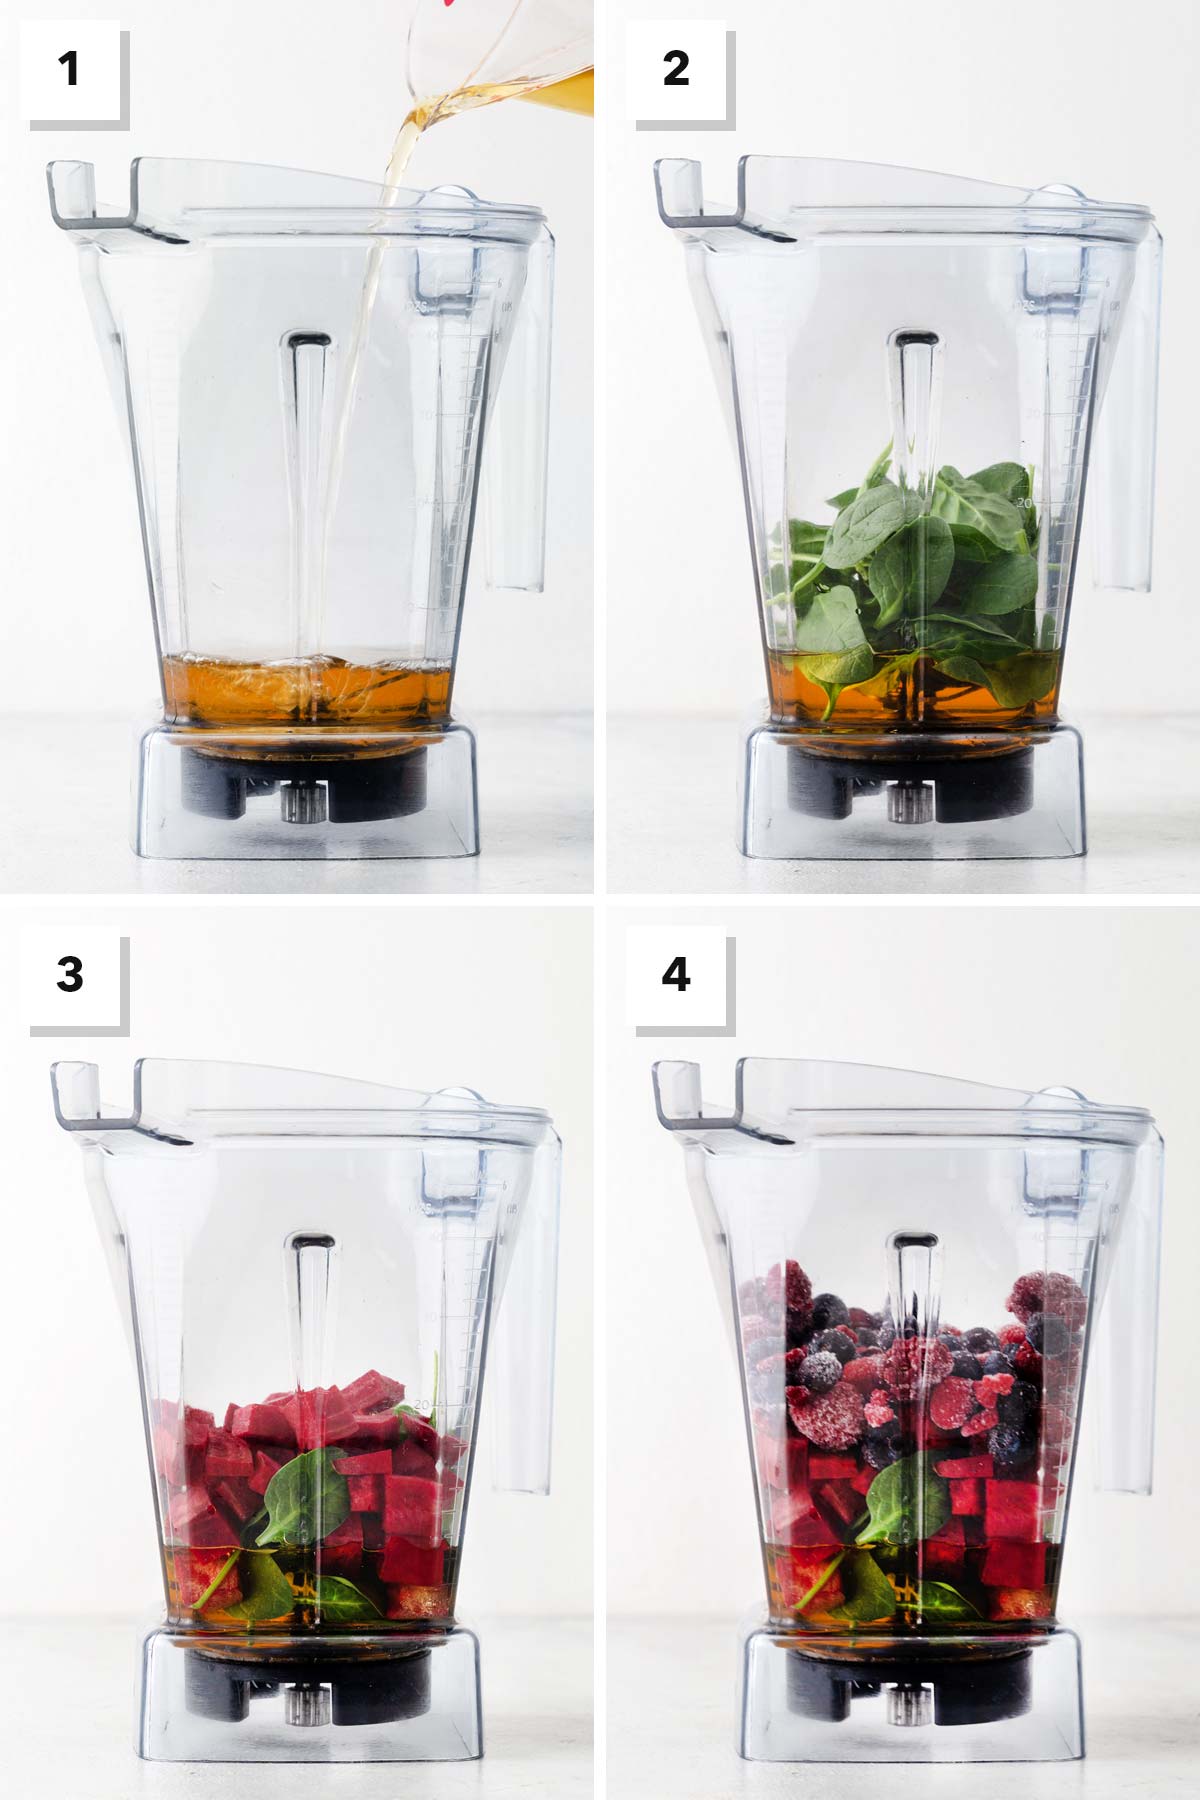 Steps for making a beet smoothie.